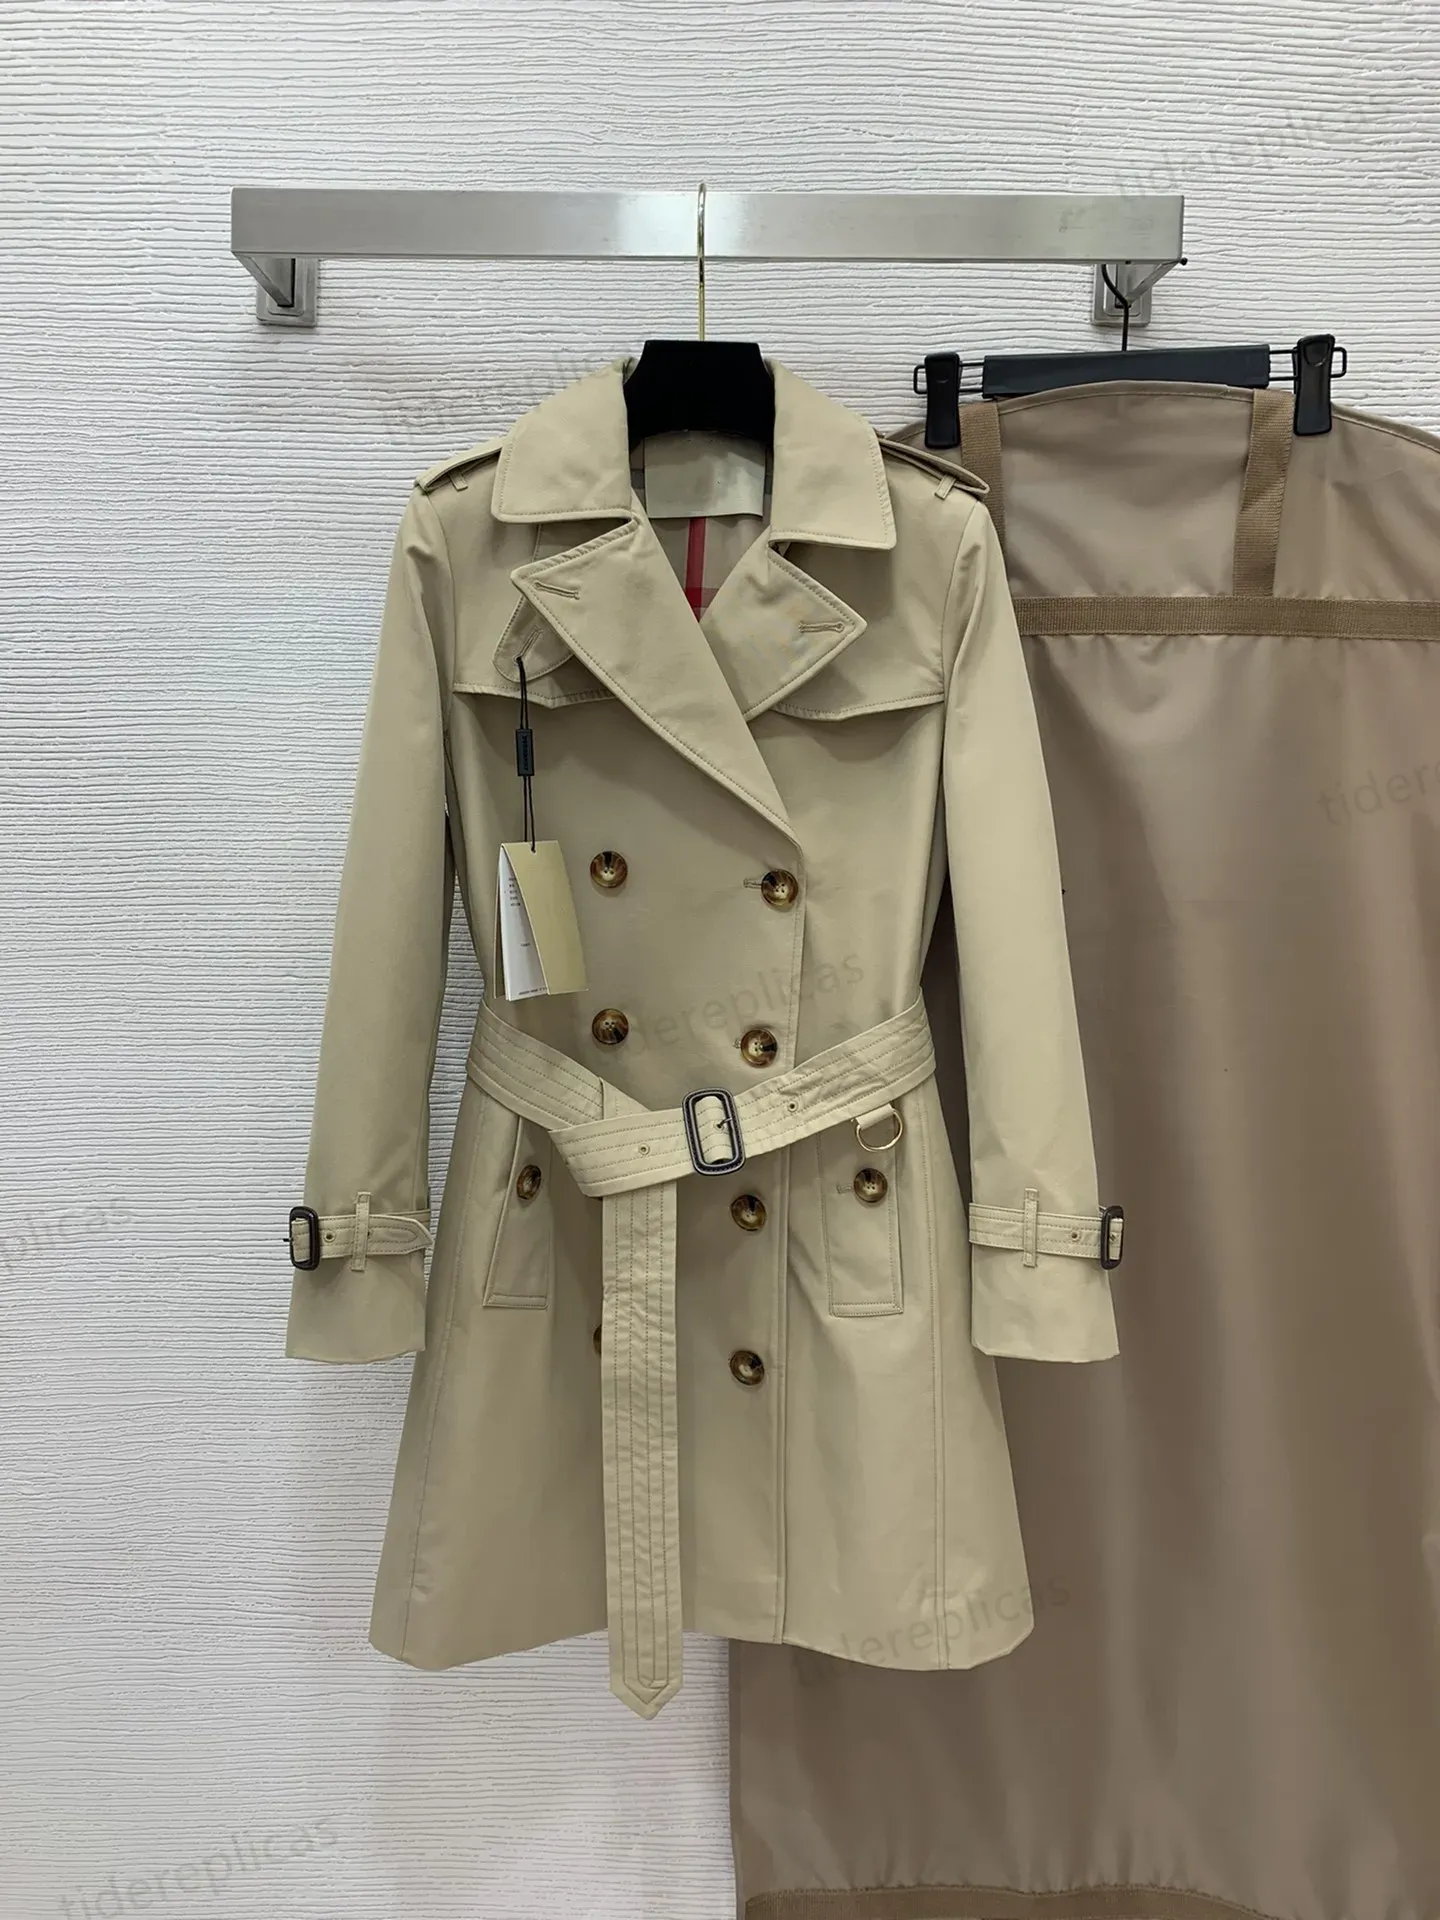 jackets womens trench coat women winter jacket designer coat women Fashionable and classic double-breasted waistline High count high density waterproof